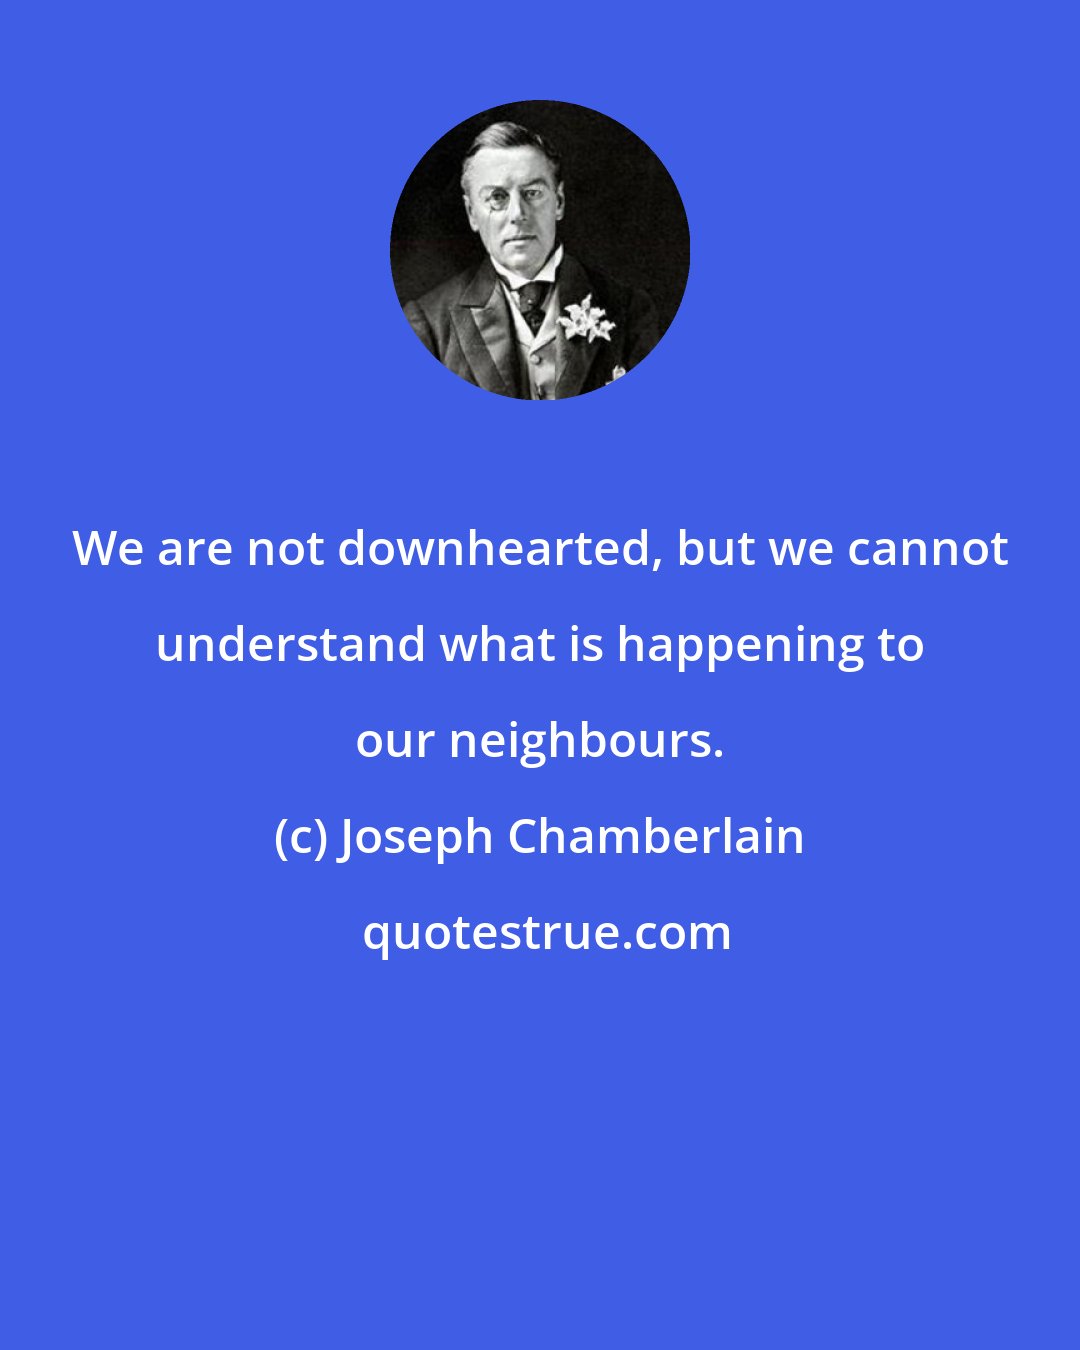 Joseph Chamberlain: We are not downhearted, but we cannot understand what is happening to our neighbours.